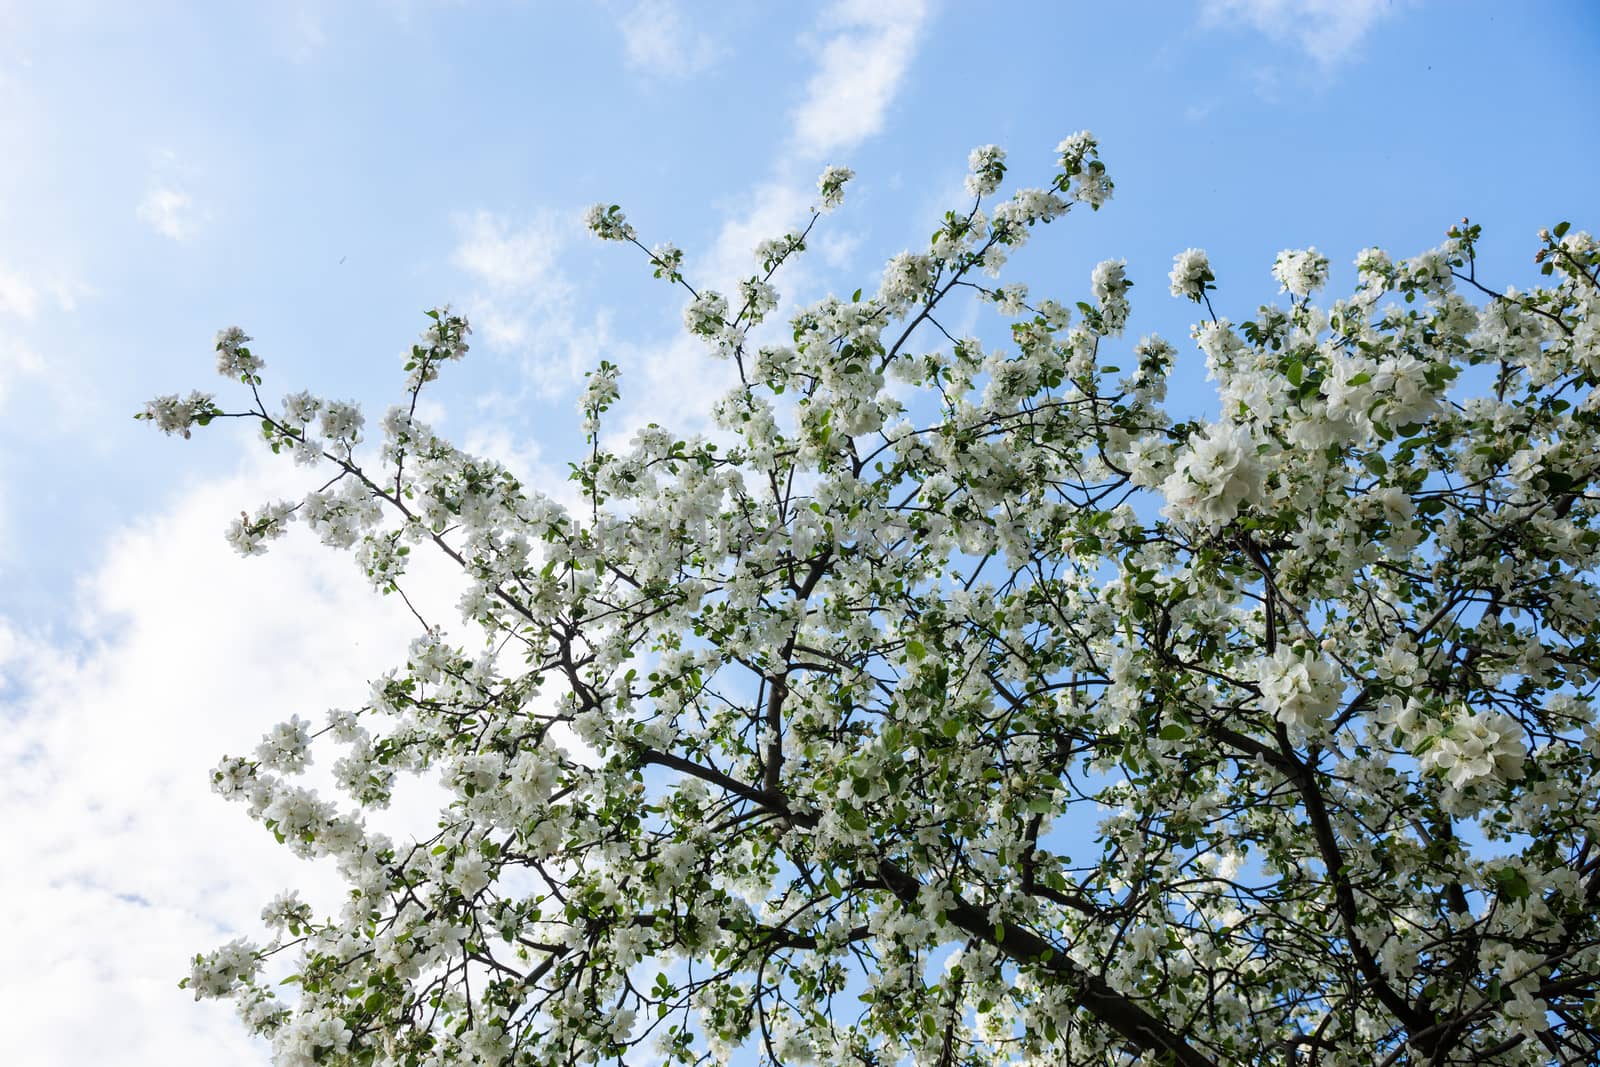 Blooming branches of the apple tree against the blue sky background.